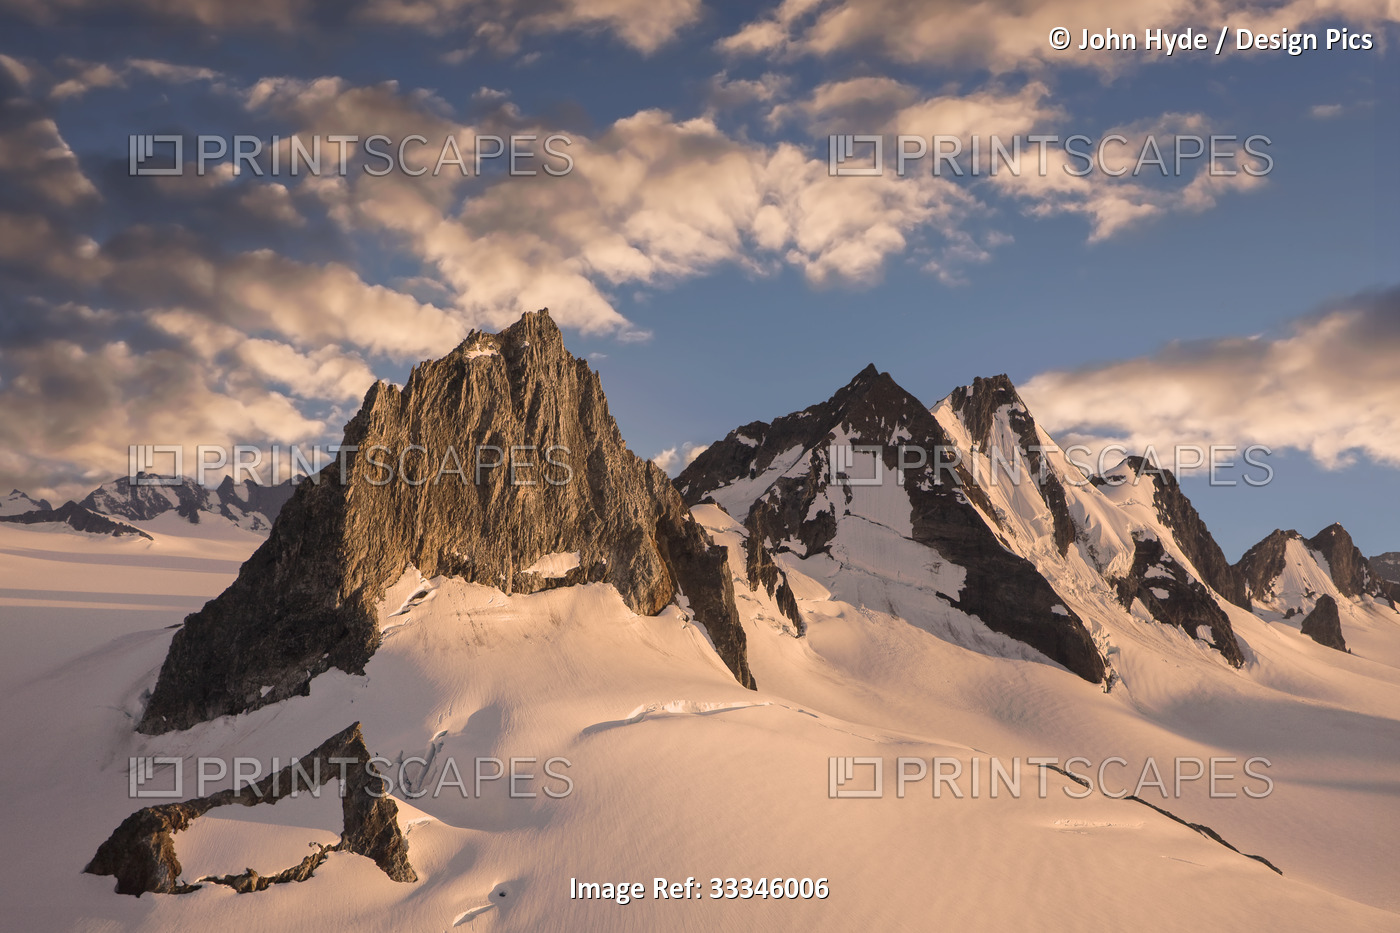 Jagged mountain peaks rise through the snowy glaciers of the Juneau Ice Field ...